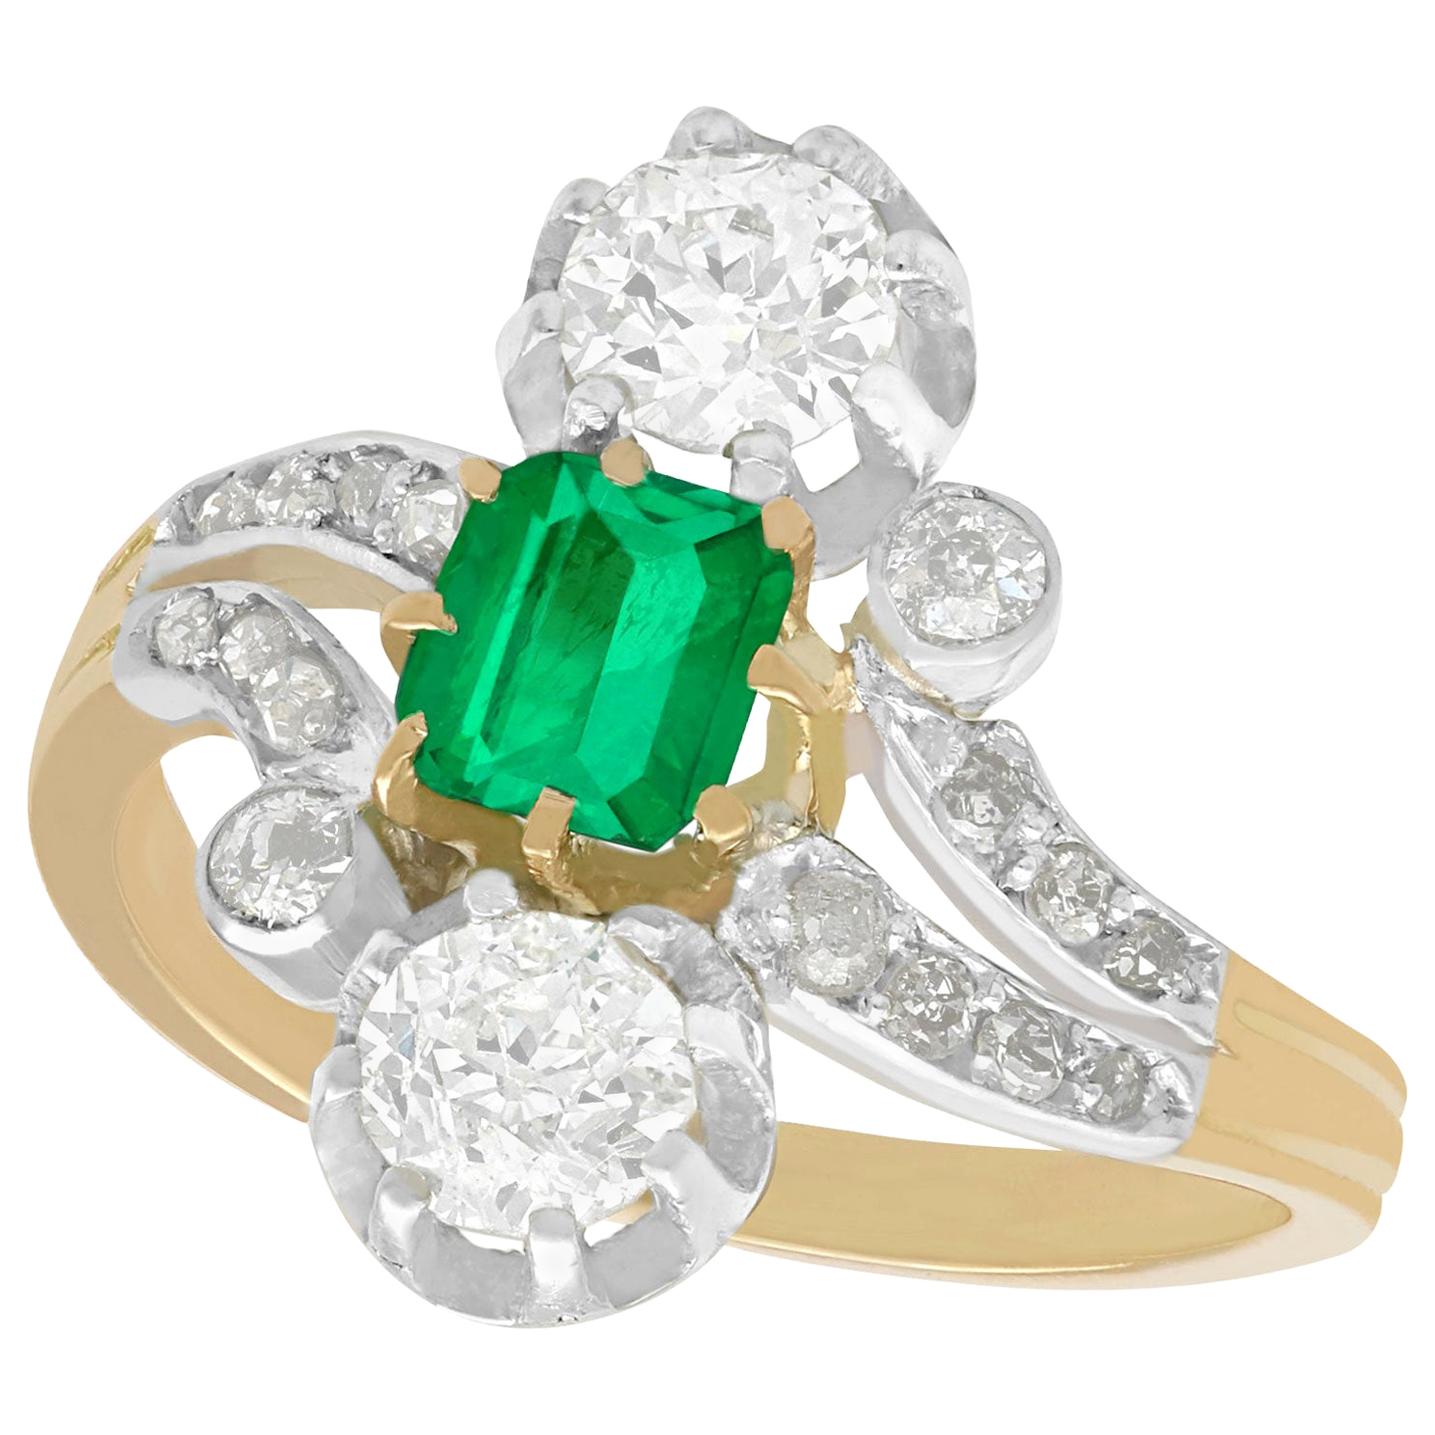 Antique 1880s 1.12 Carat Diamond and Emerald Yellow Gold Silver Set Twist Ring